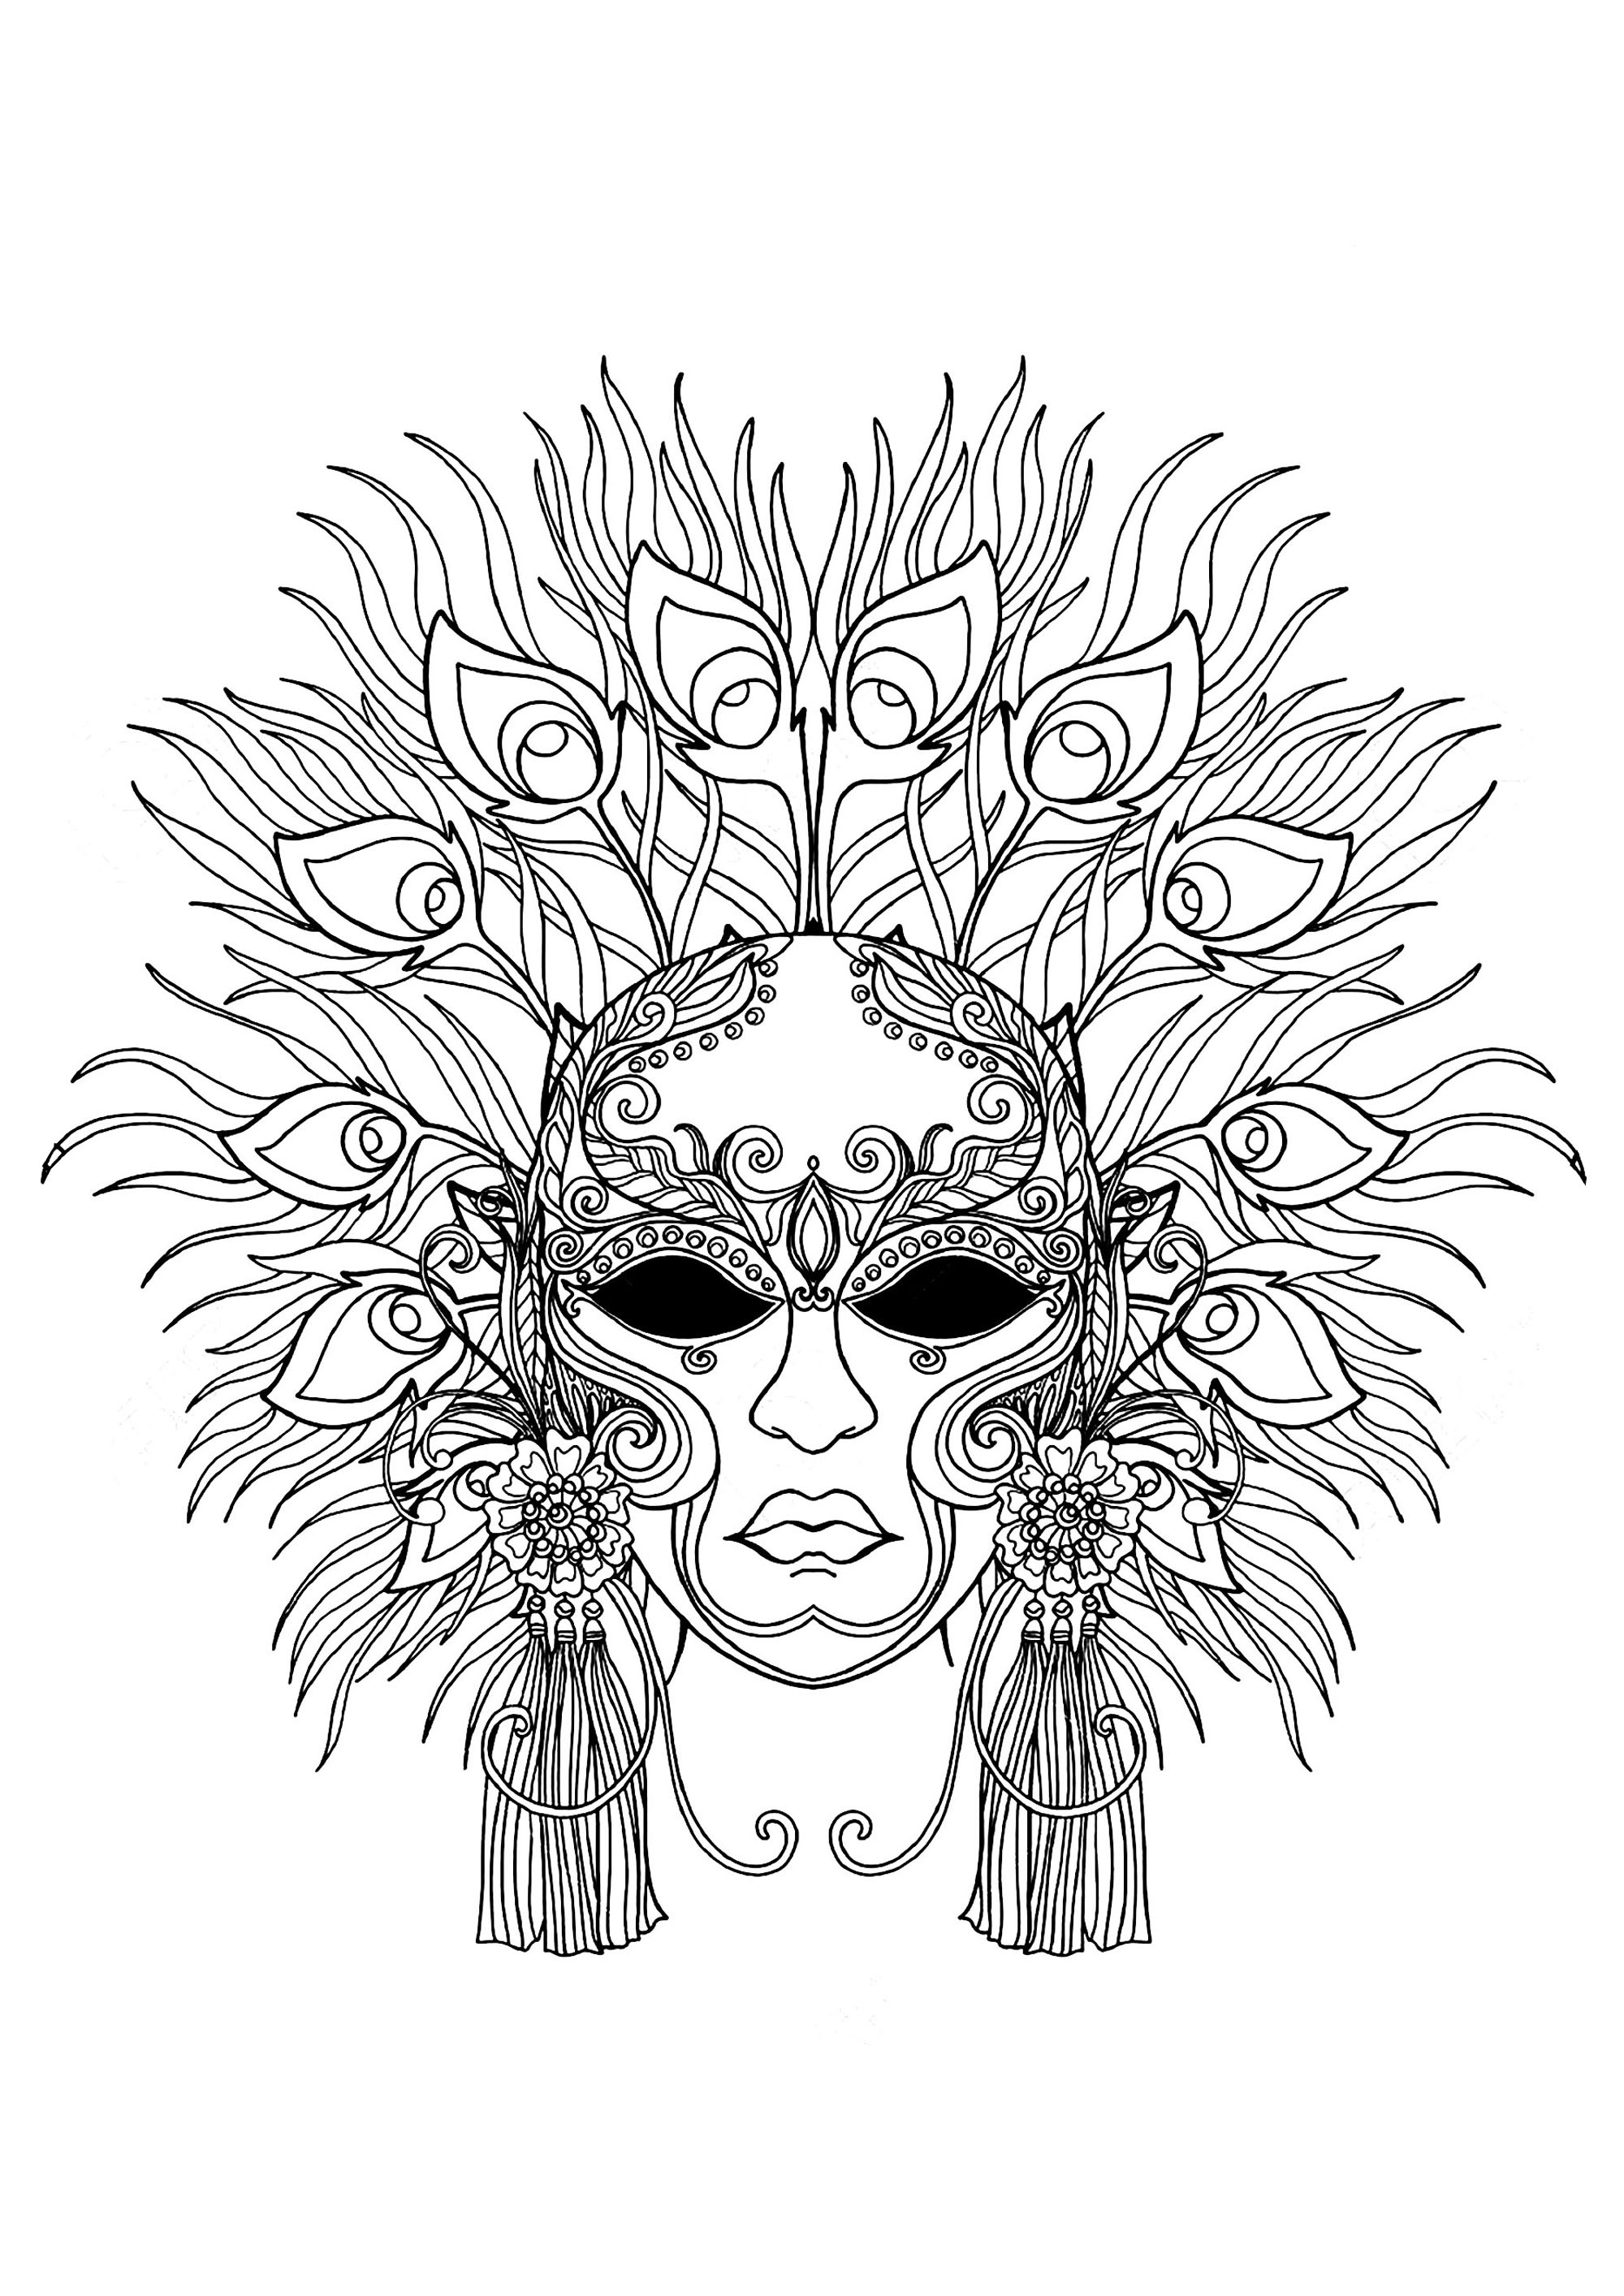 A Mask Of The Carnival Of Venice To Color - Carnival Kids Coloring Pages